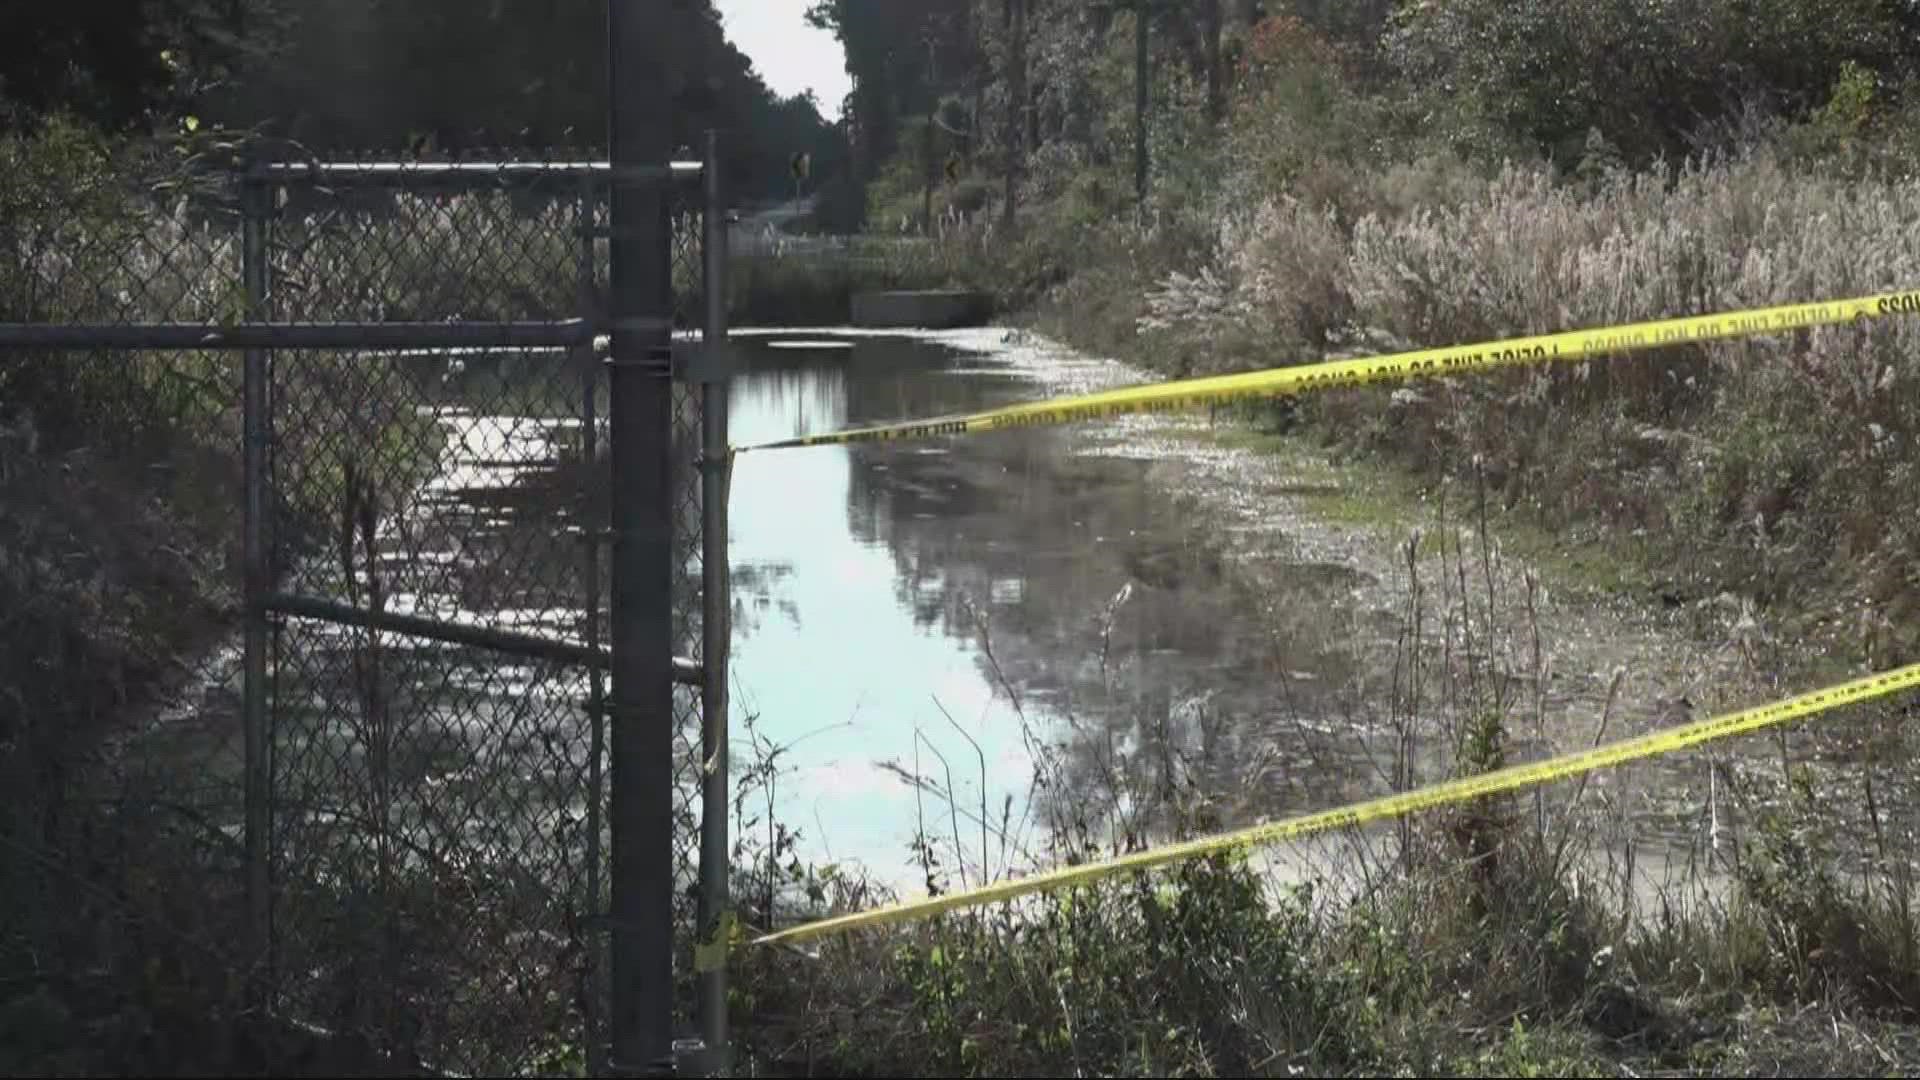 Officials found a car in a pond on Wind Chime Lane in the Callahan area. The exact time of the crash is unknown.